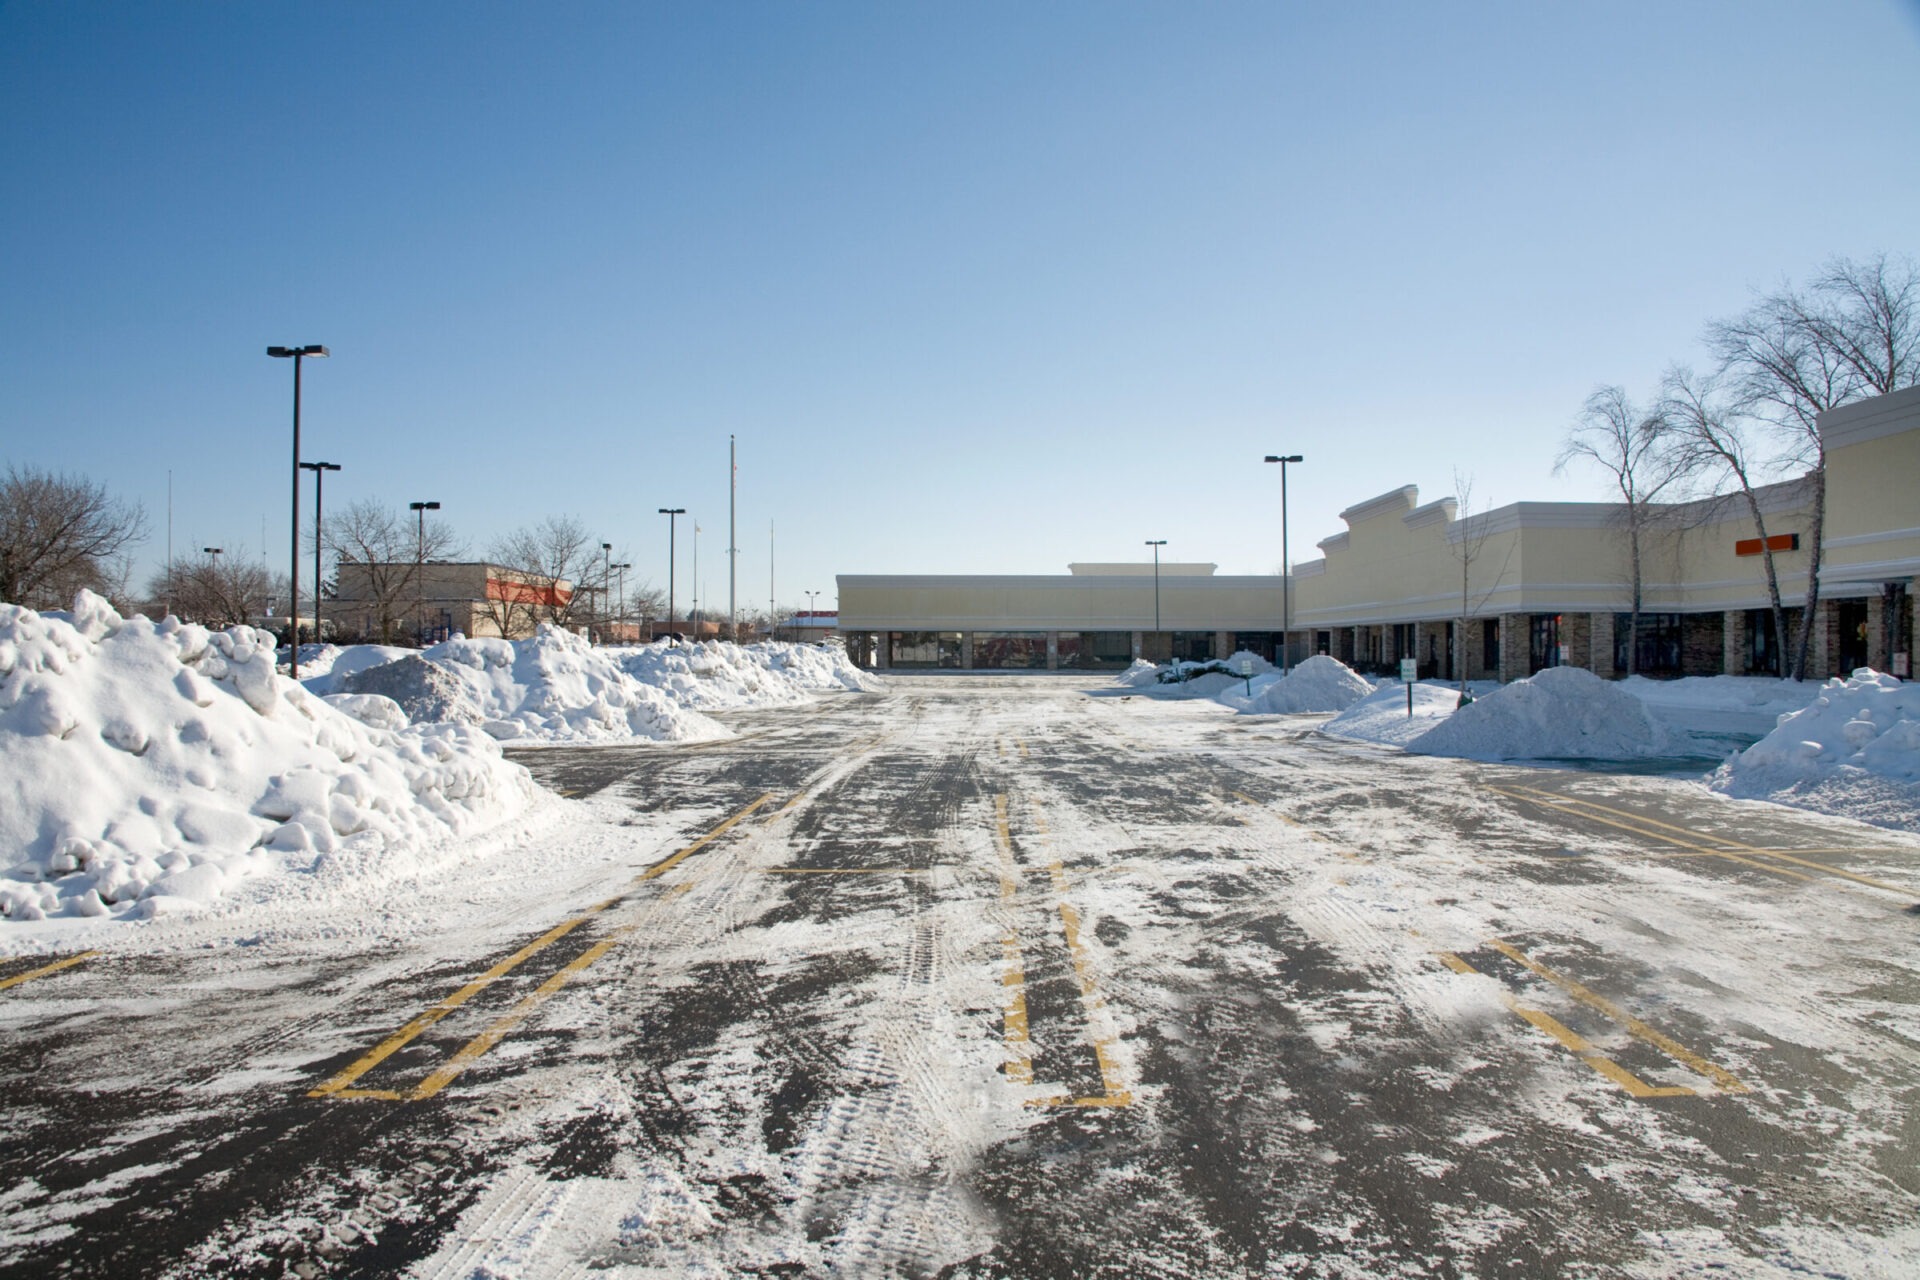 A snowy parking lot with large piles of plowed snow, bare trees, a strip mall in the background, and clear blue skies.